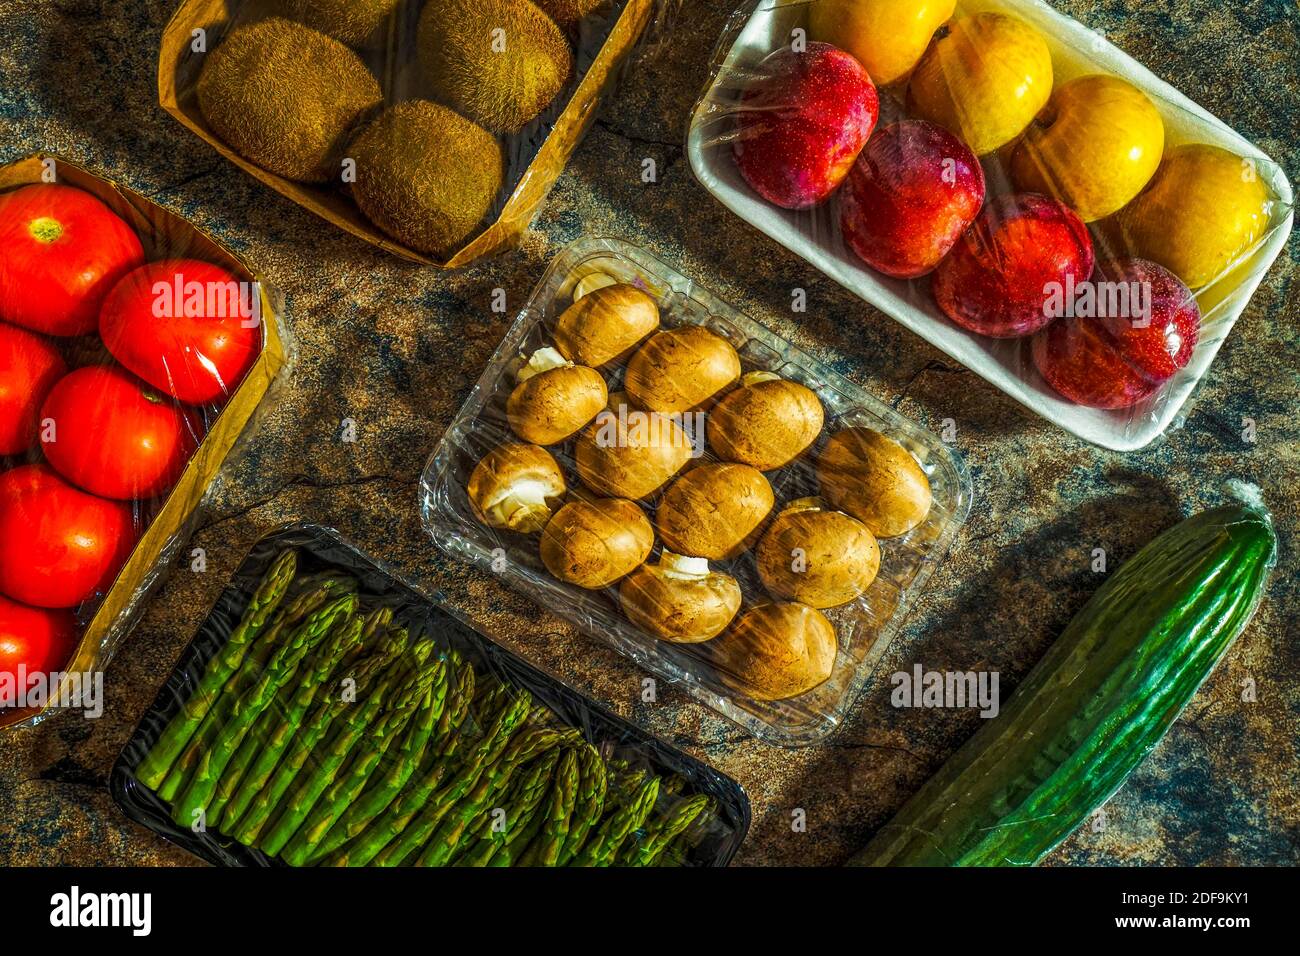 Plastic waste in stores. Fruits and vegetables packed in plastic wrappers that inundate supermarkets. Stock Photo